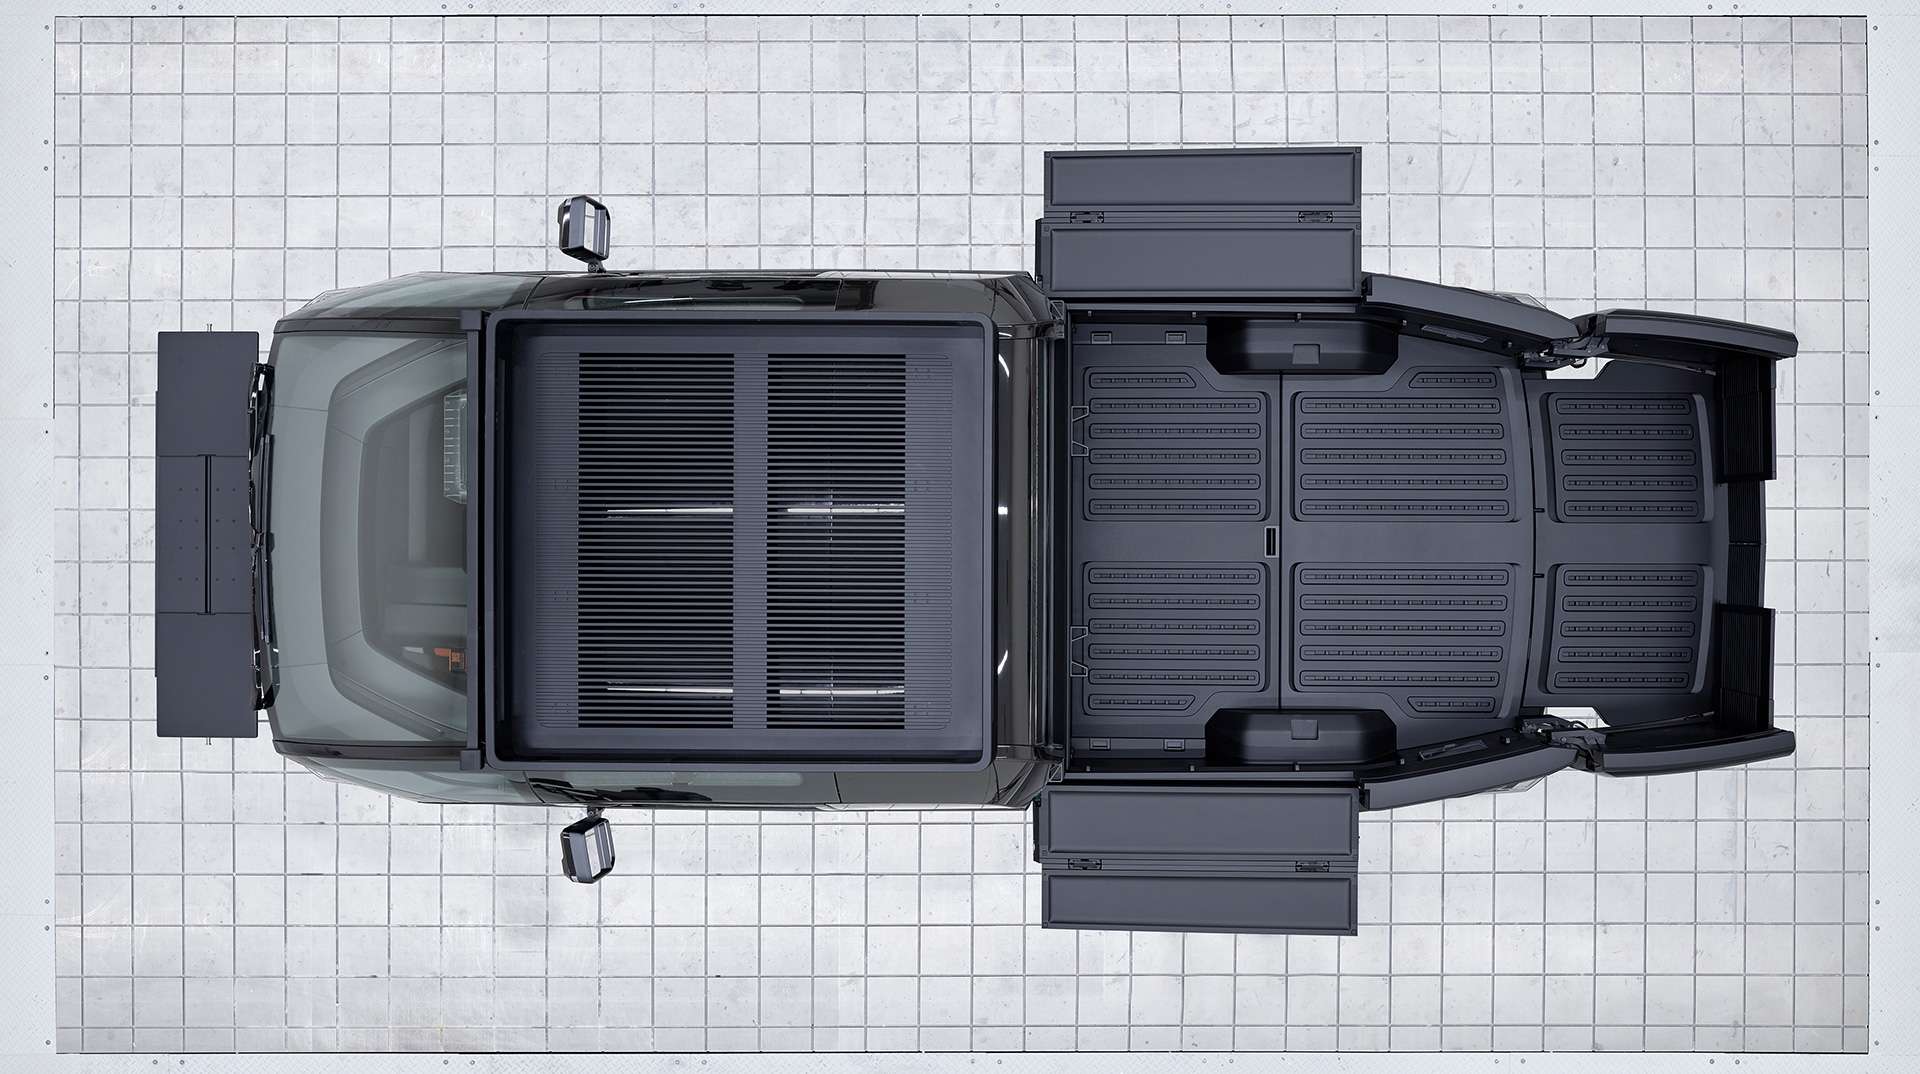 Aerial image of Canoo truck model from Canoo website